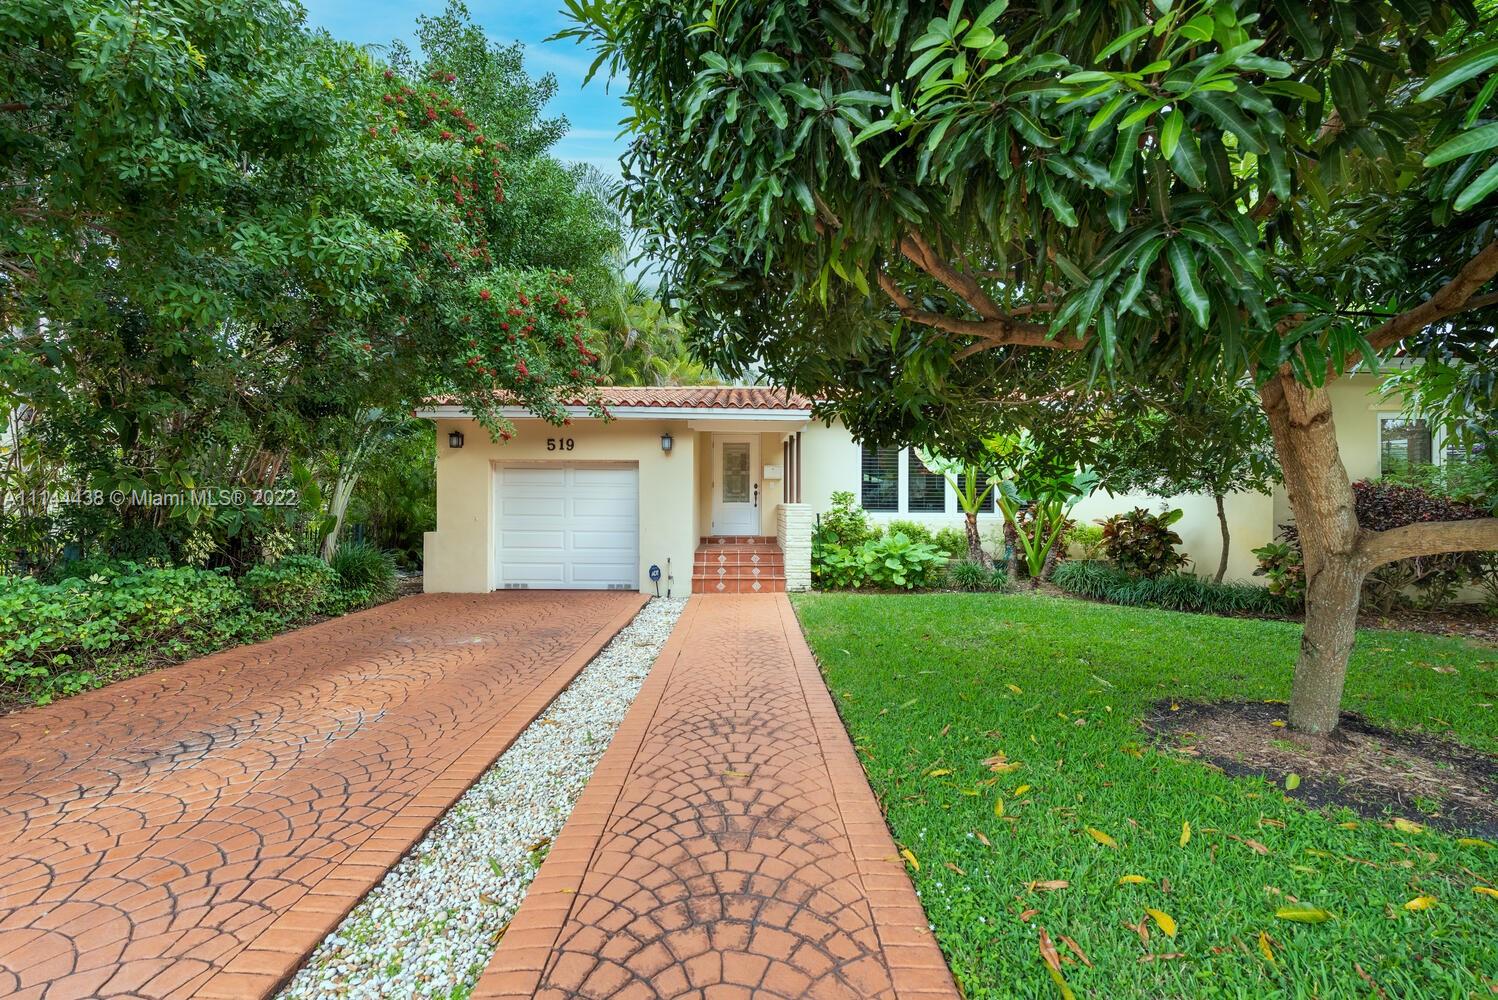 Open, bright, and lovingly maintained this home in the Italian village of Coral Gables has so much to offer. From the moment you walk in you feel the openness of the living area, the warmth of the recently refinished wood floors and the sense of tranquility that all the natural light offers, you will want to call this your own. Even though you may not want to leave the inviting interior, the grounds offer an intimate tropical feel with several exotic fruit trees and lush landscaping. Patio and pool area are accessible from several vantage points through the home that allows easy and relaxing entertainment options. This is a really nice home, checks off all the boxes.